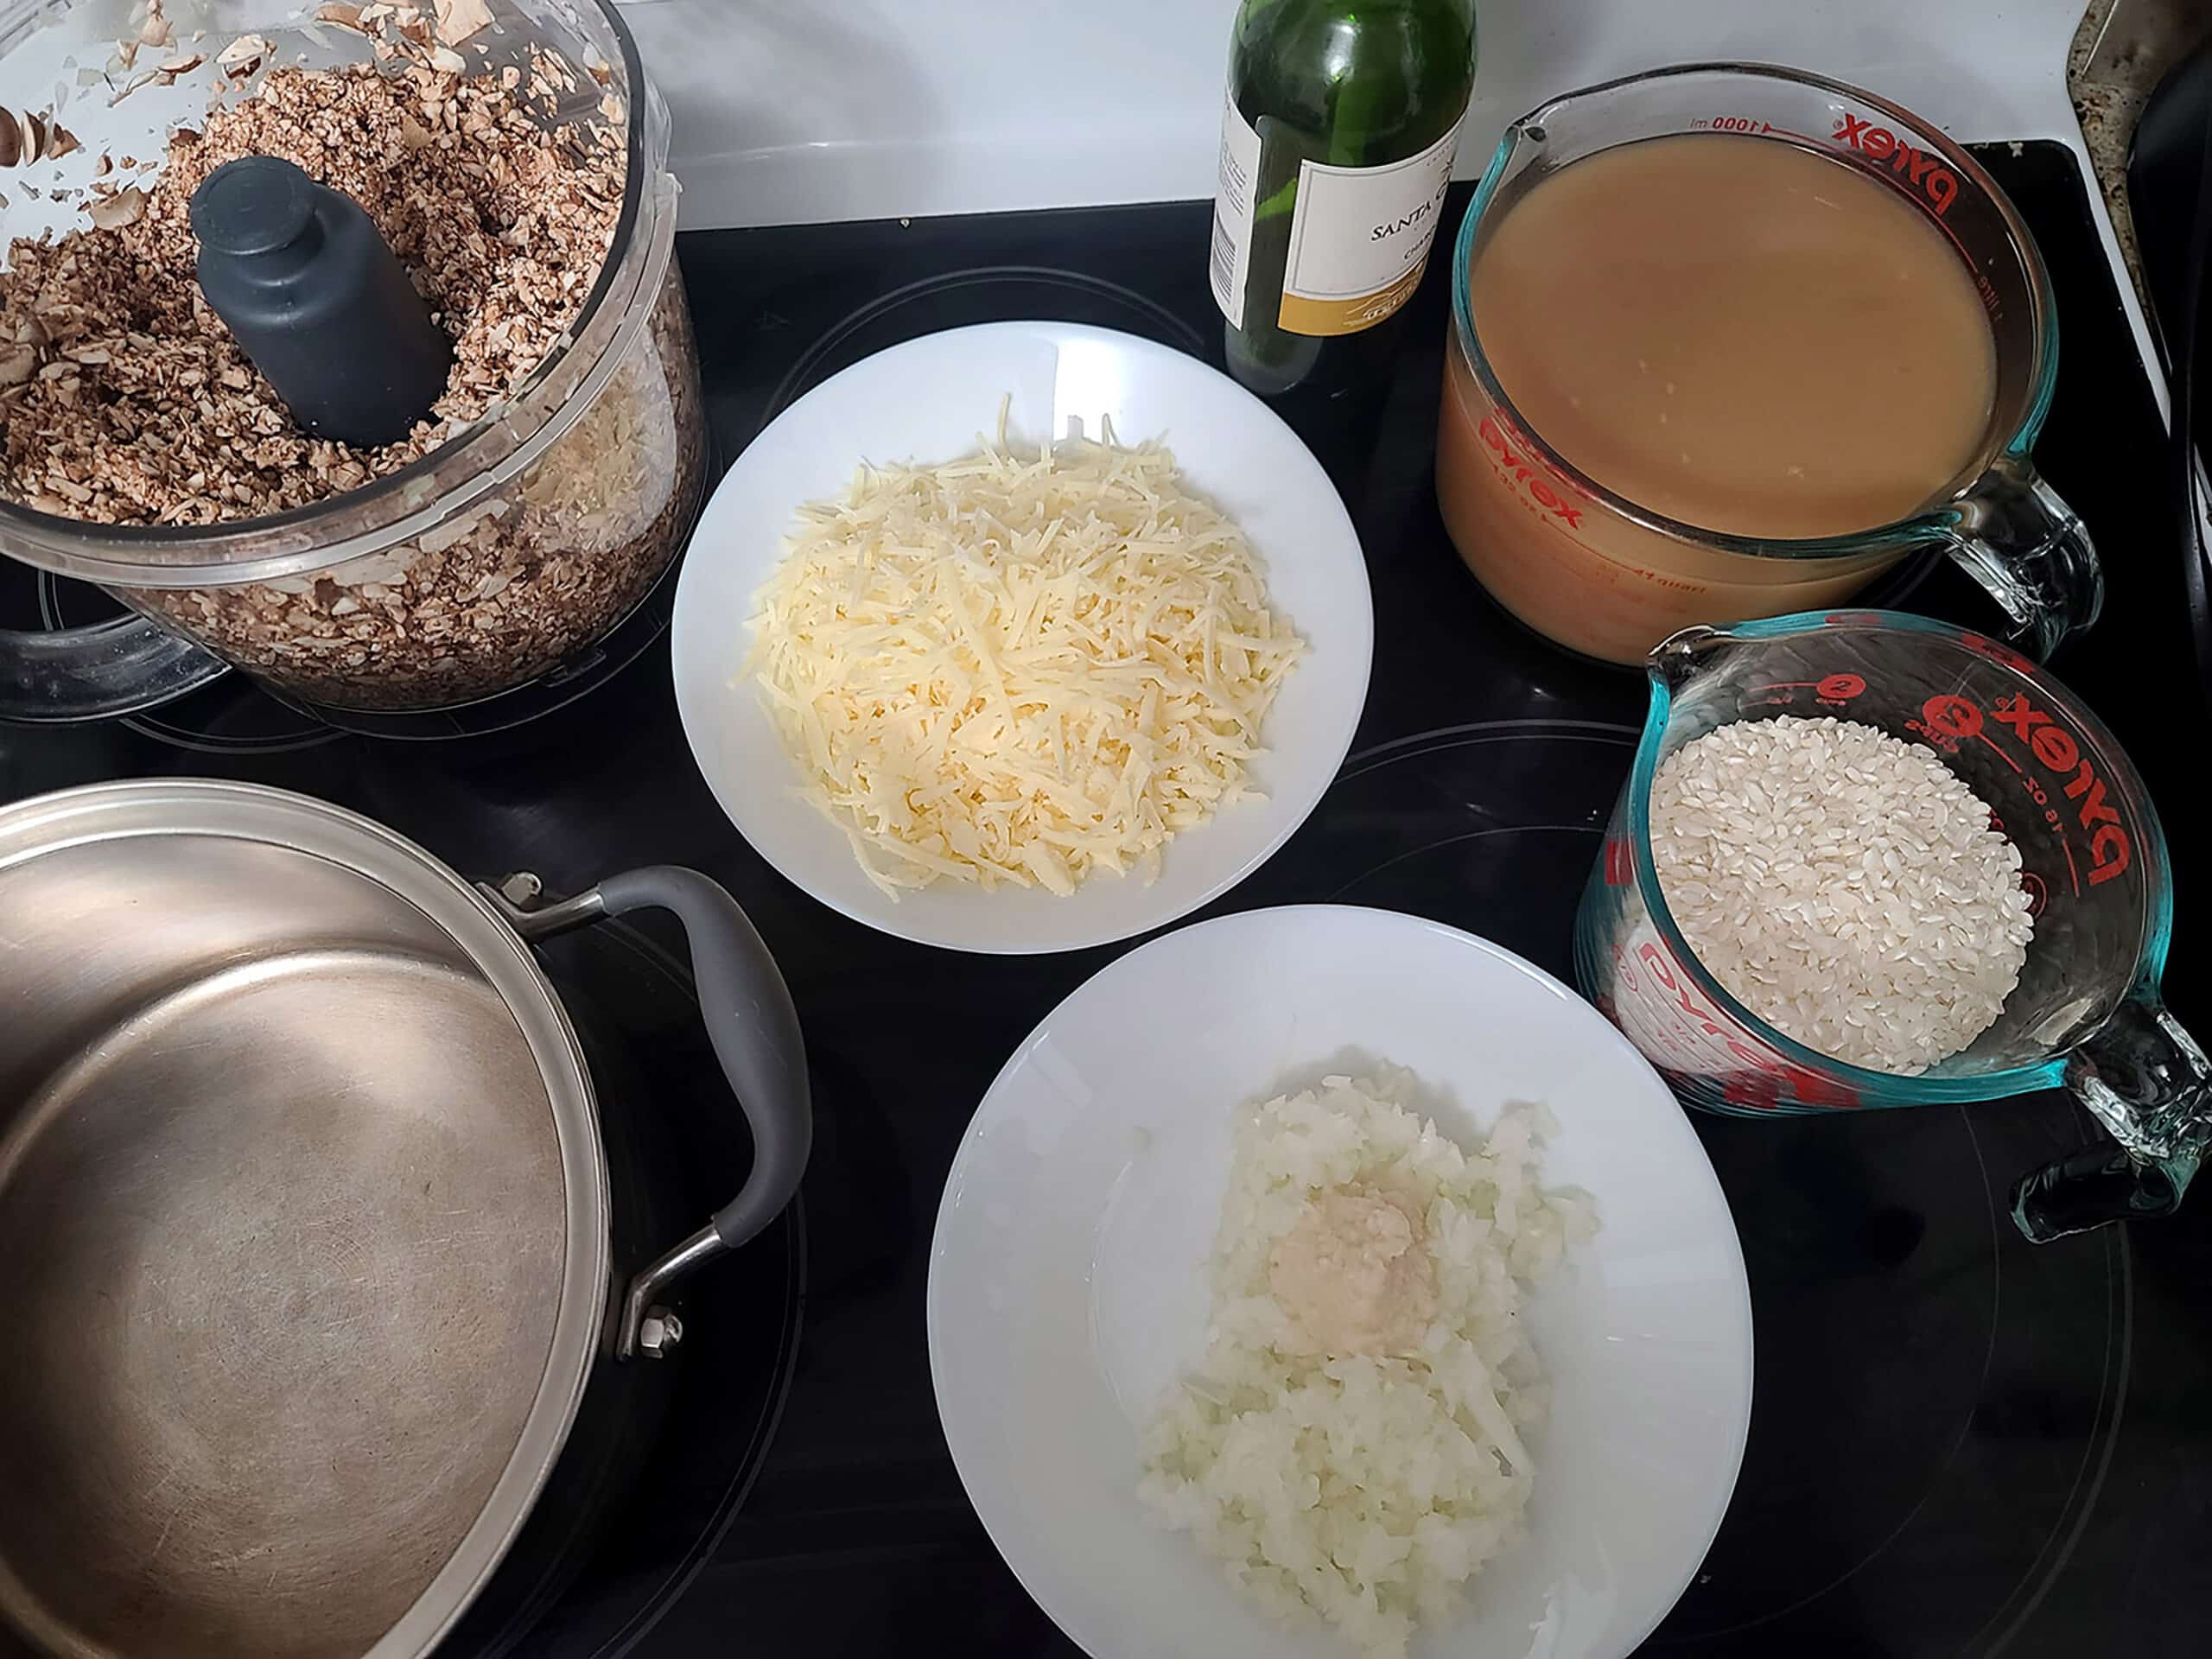 The mushroom risotto ingredients laid out on a stove top.